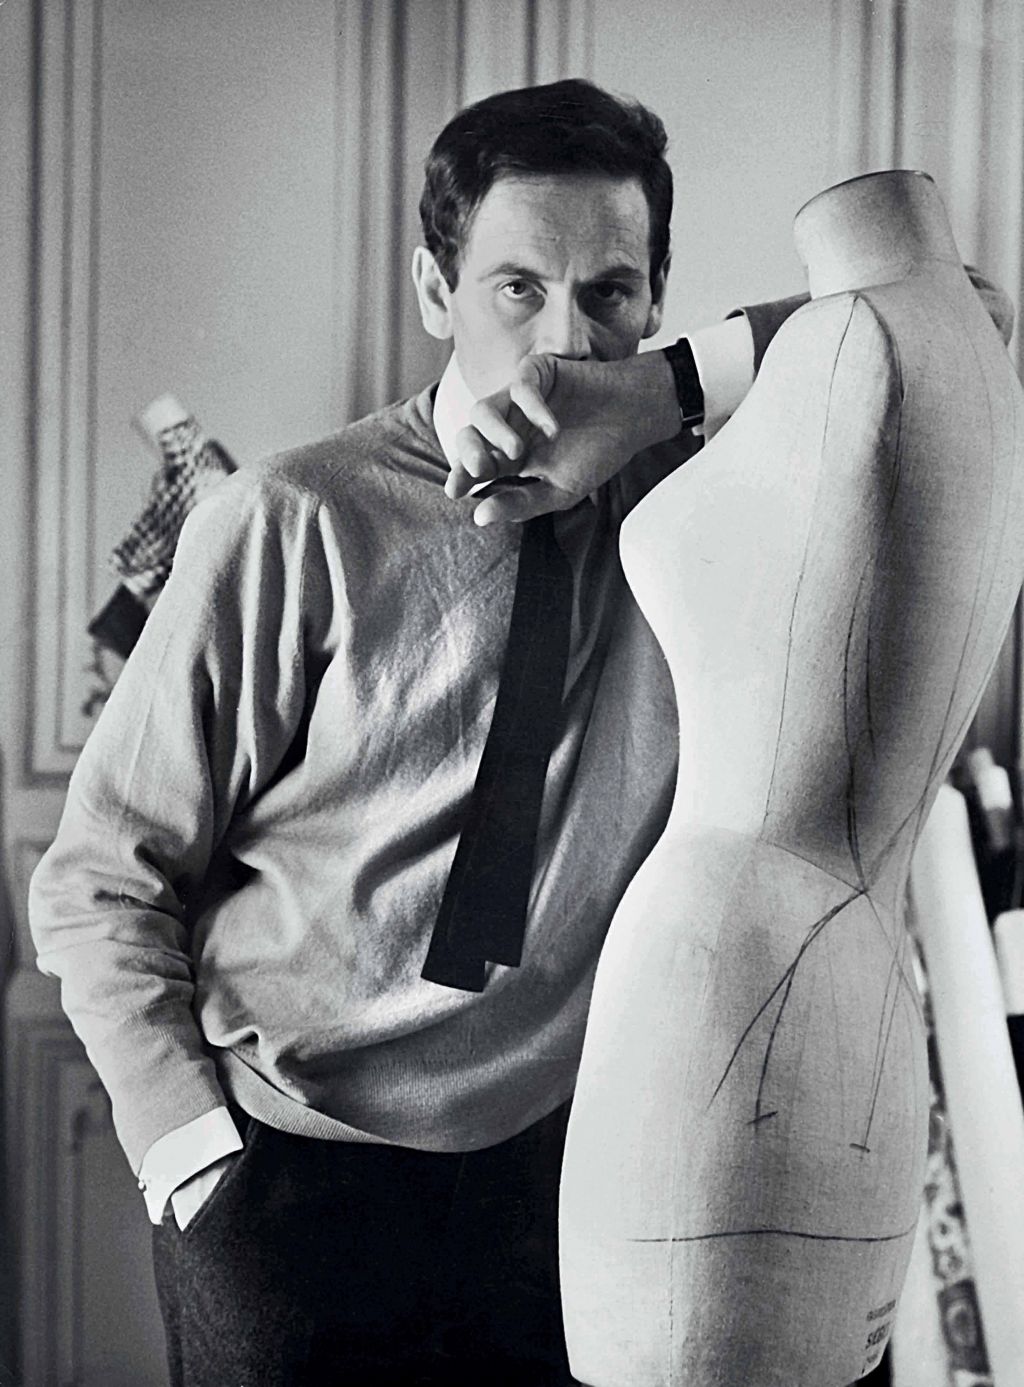 Pierre Cardin - DVD PRESTIGE EDITION. You know the name, discover the man.

An exceptional documentary in a prestige edition (3,000 copies).

The House...